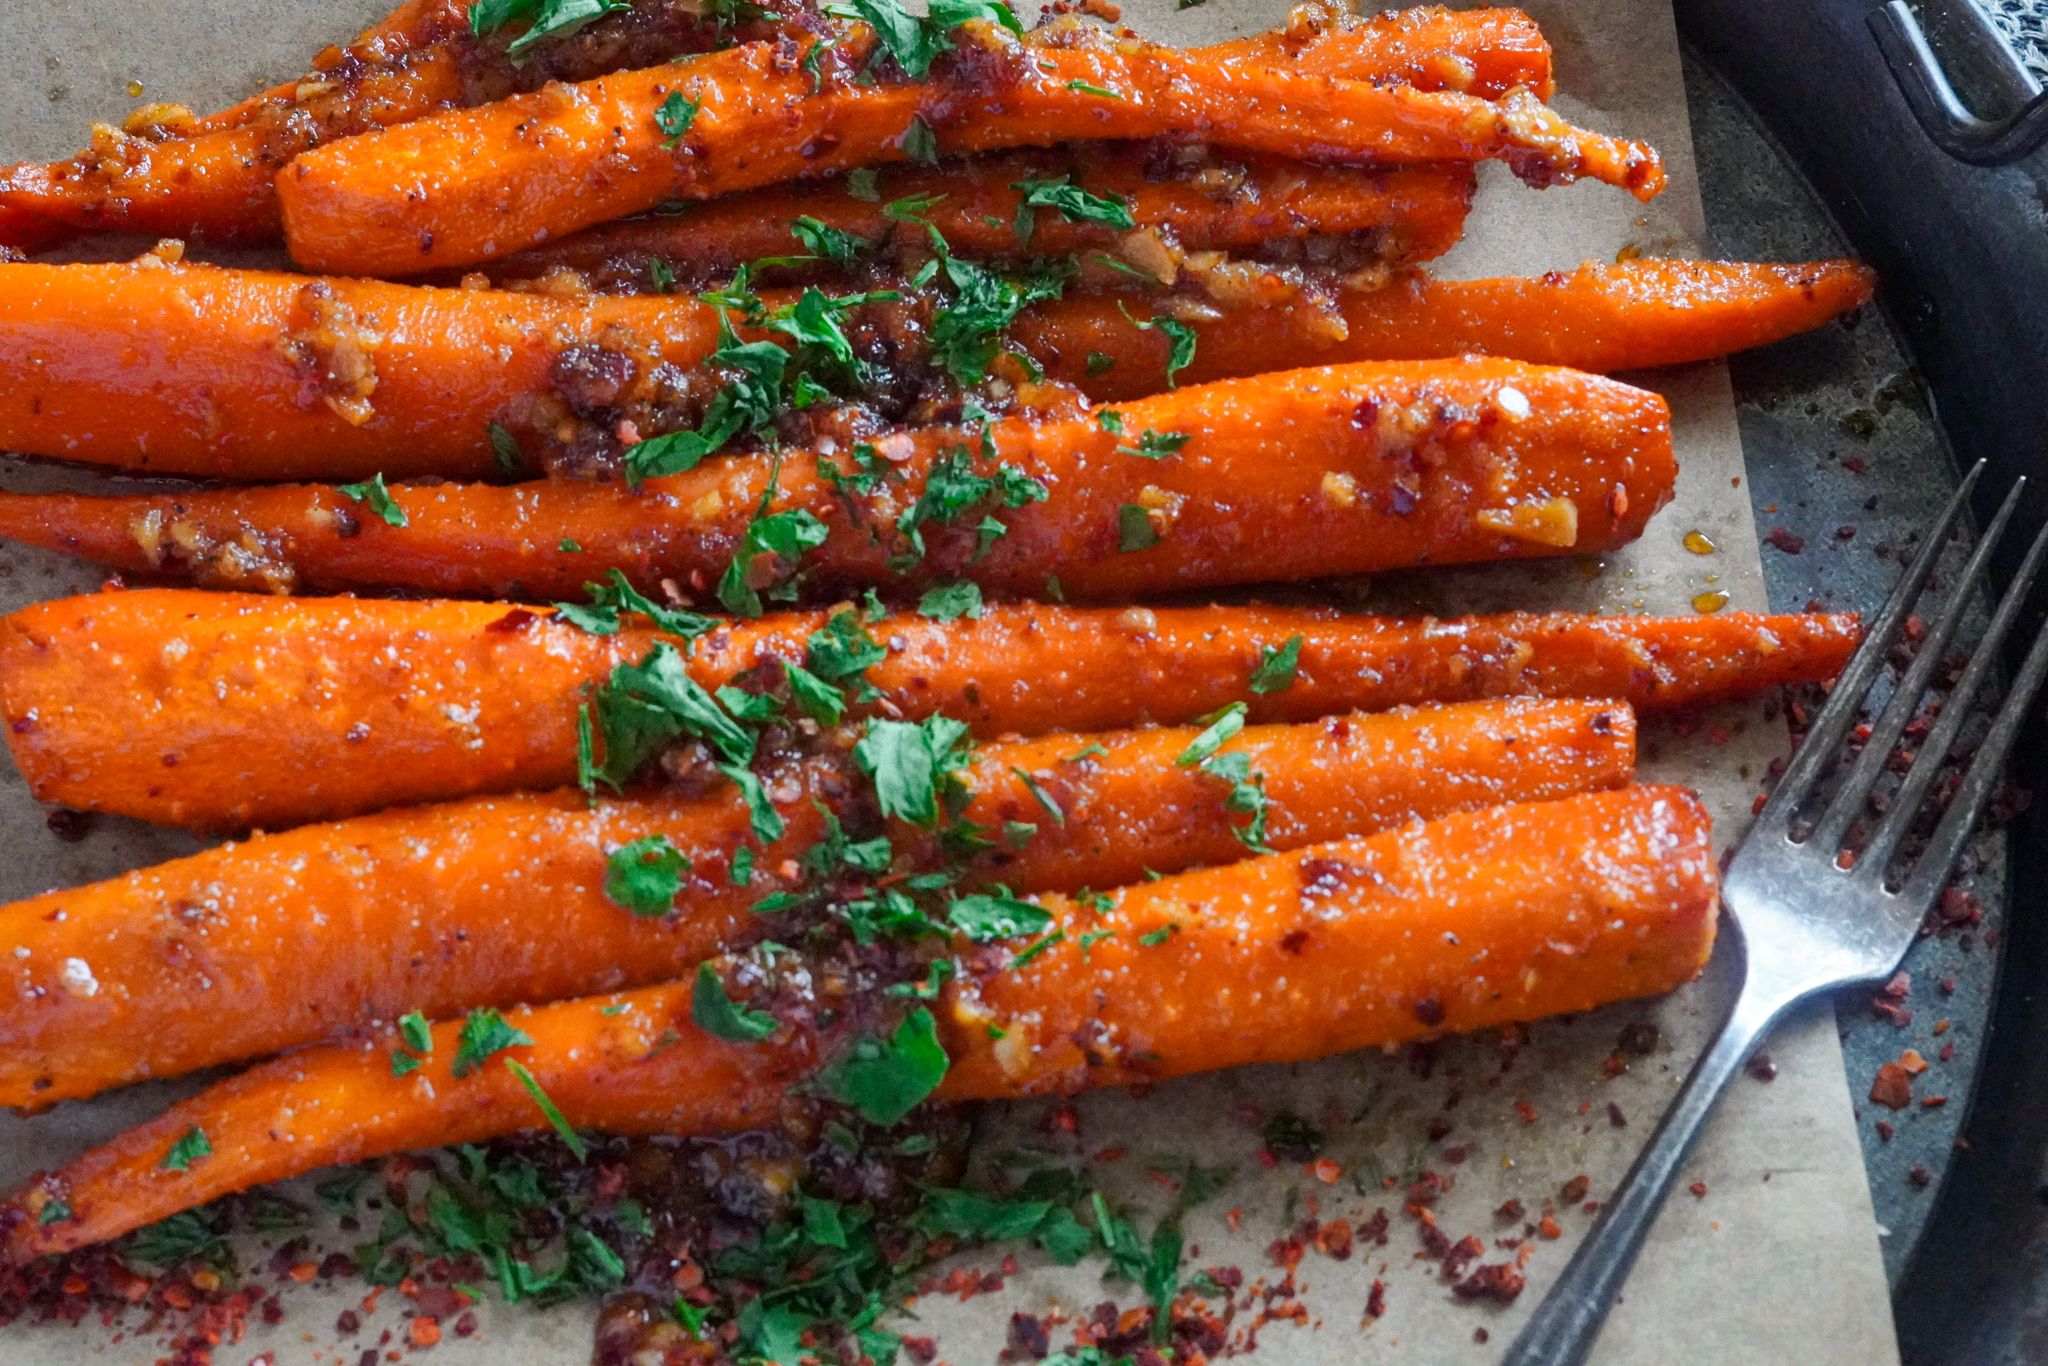 A lined pan of carrots seasoned with honey, garlic, olive oil, and other seasonings and topped with some chopped parsley